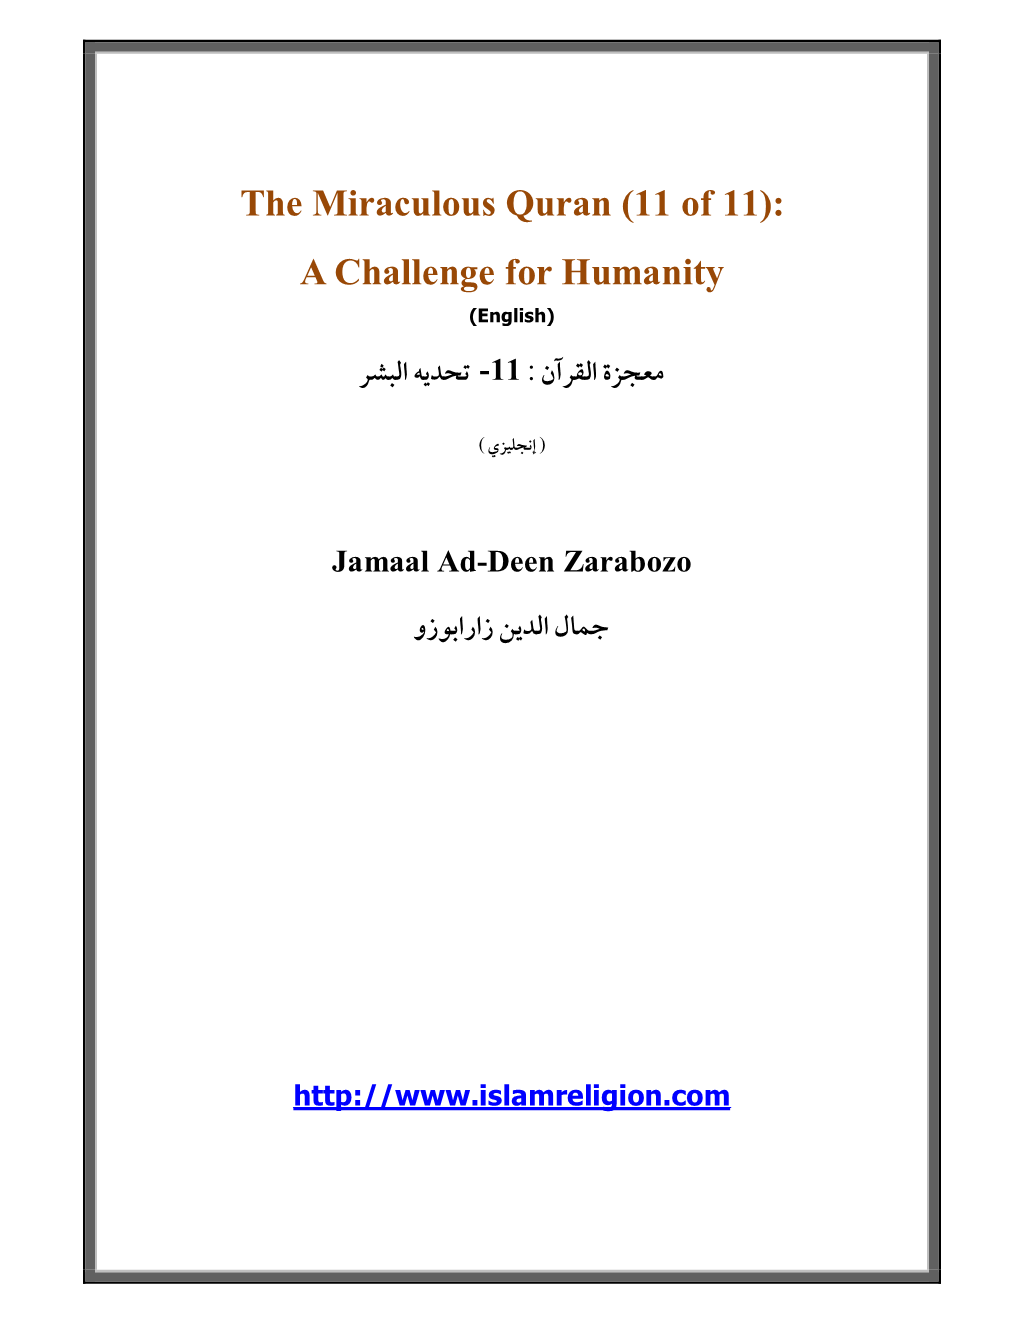 The Miraculous Quran (Part 11 of 11): a Challenge for Humanity